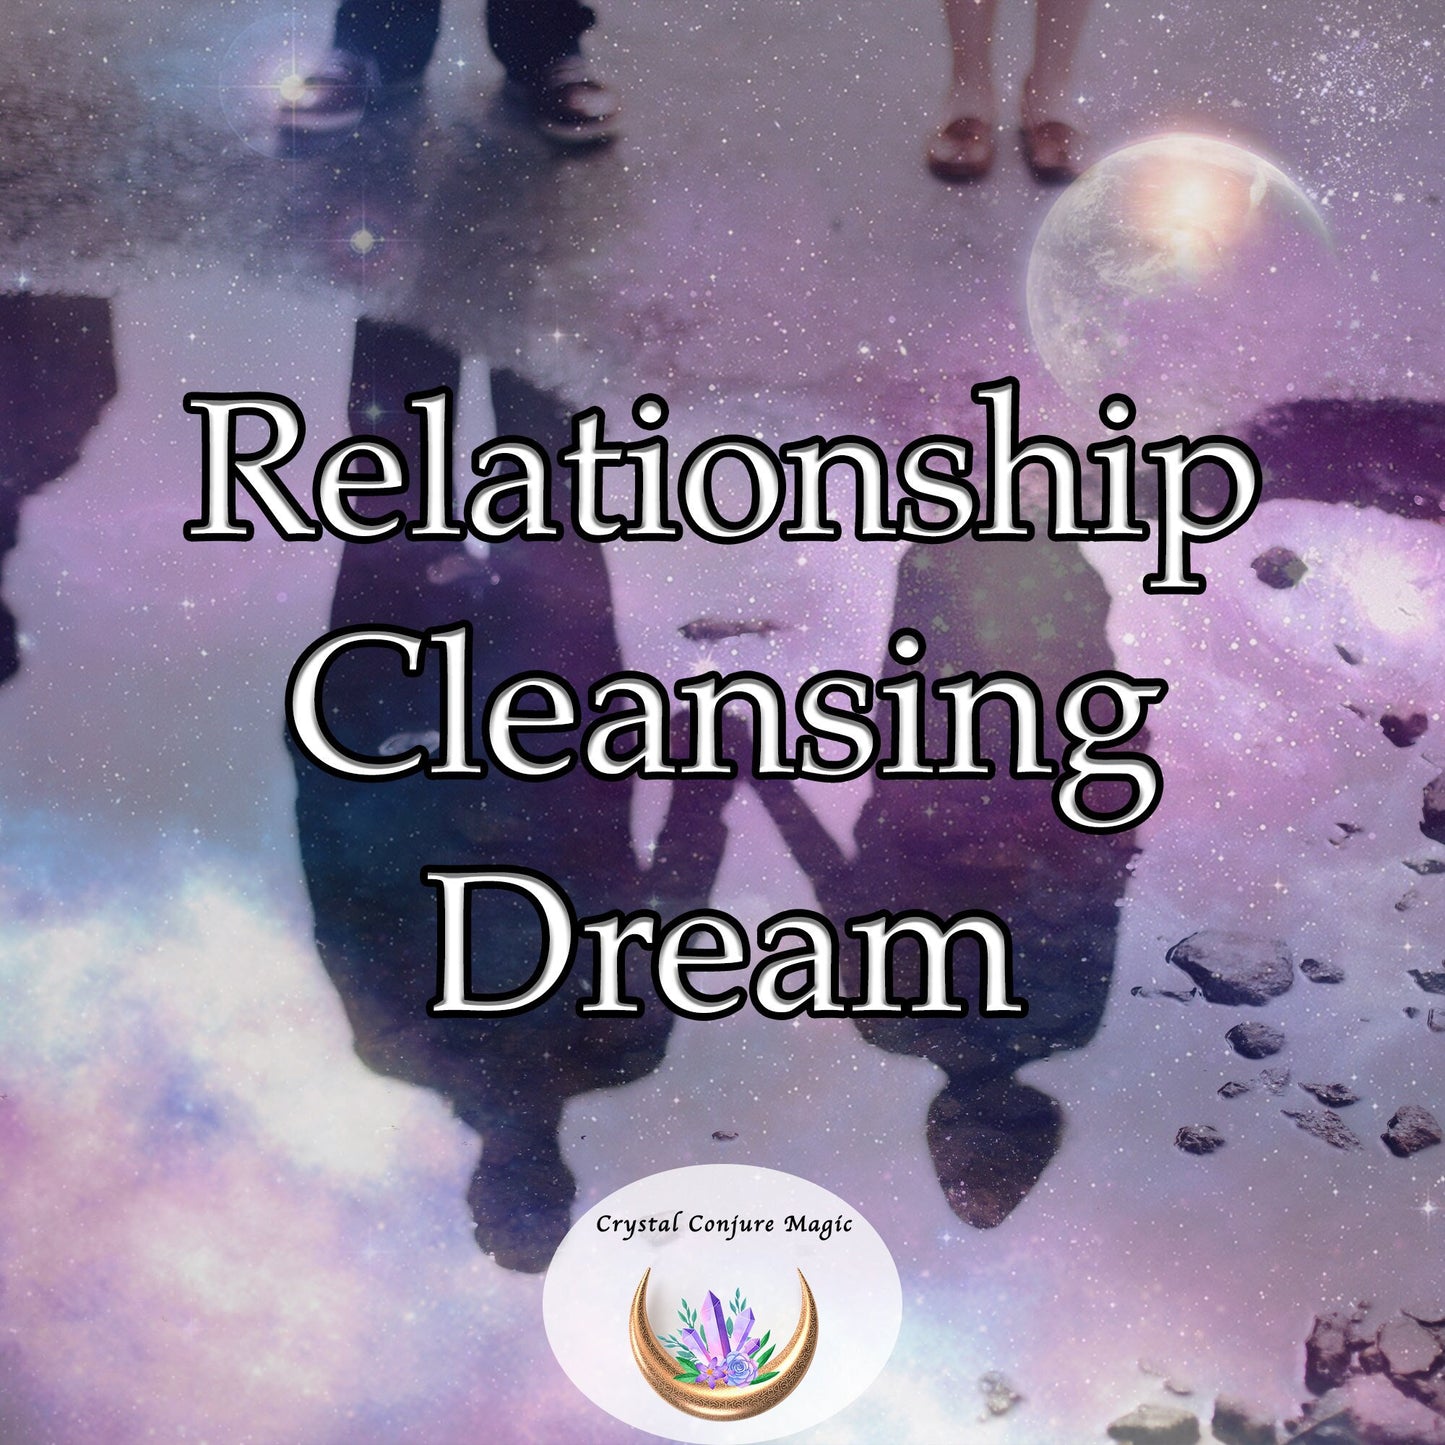 Relationship Cleansing Dream - cleanse your relationship of negativity and restore balance and tranquility